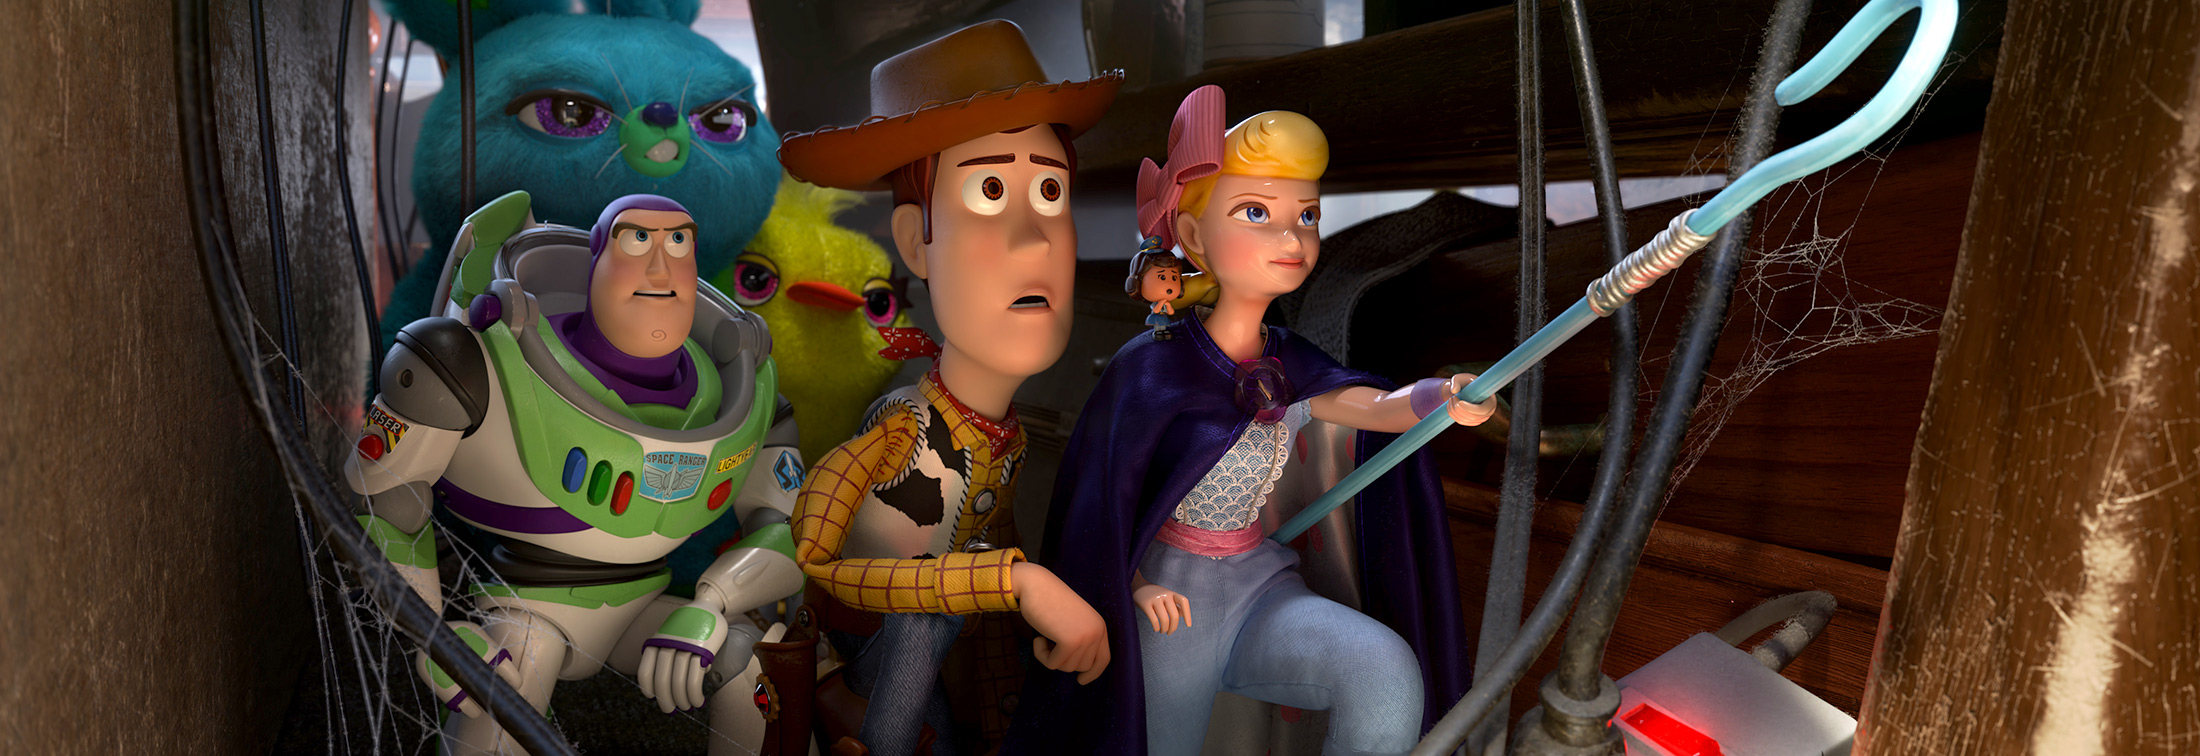 Toy Story 4 - Entertaining but thoroughly unnecessary